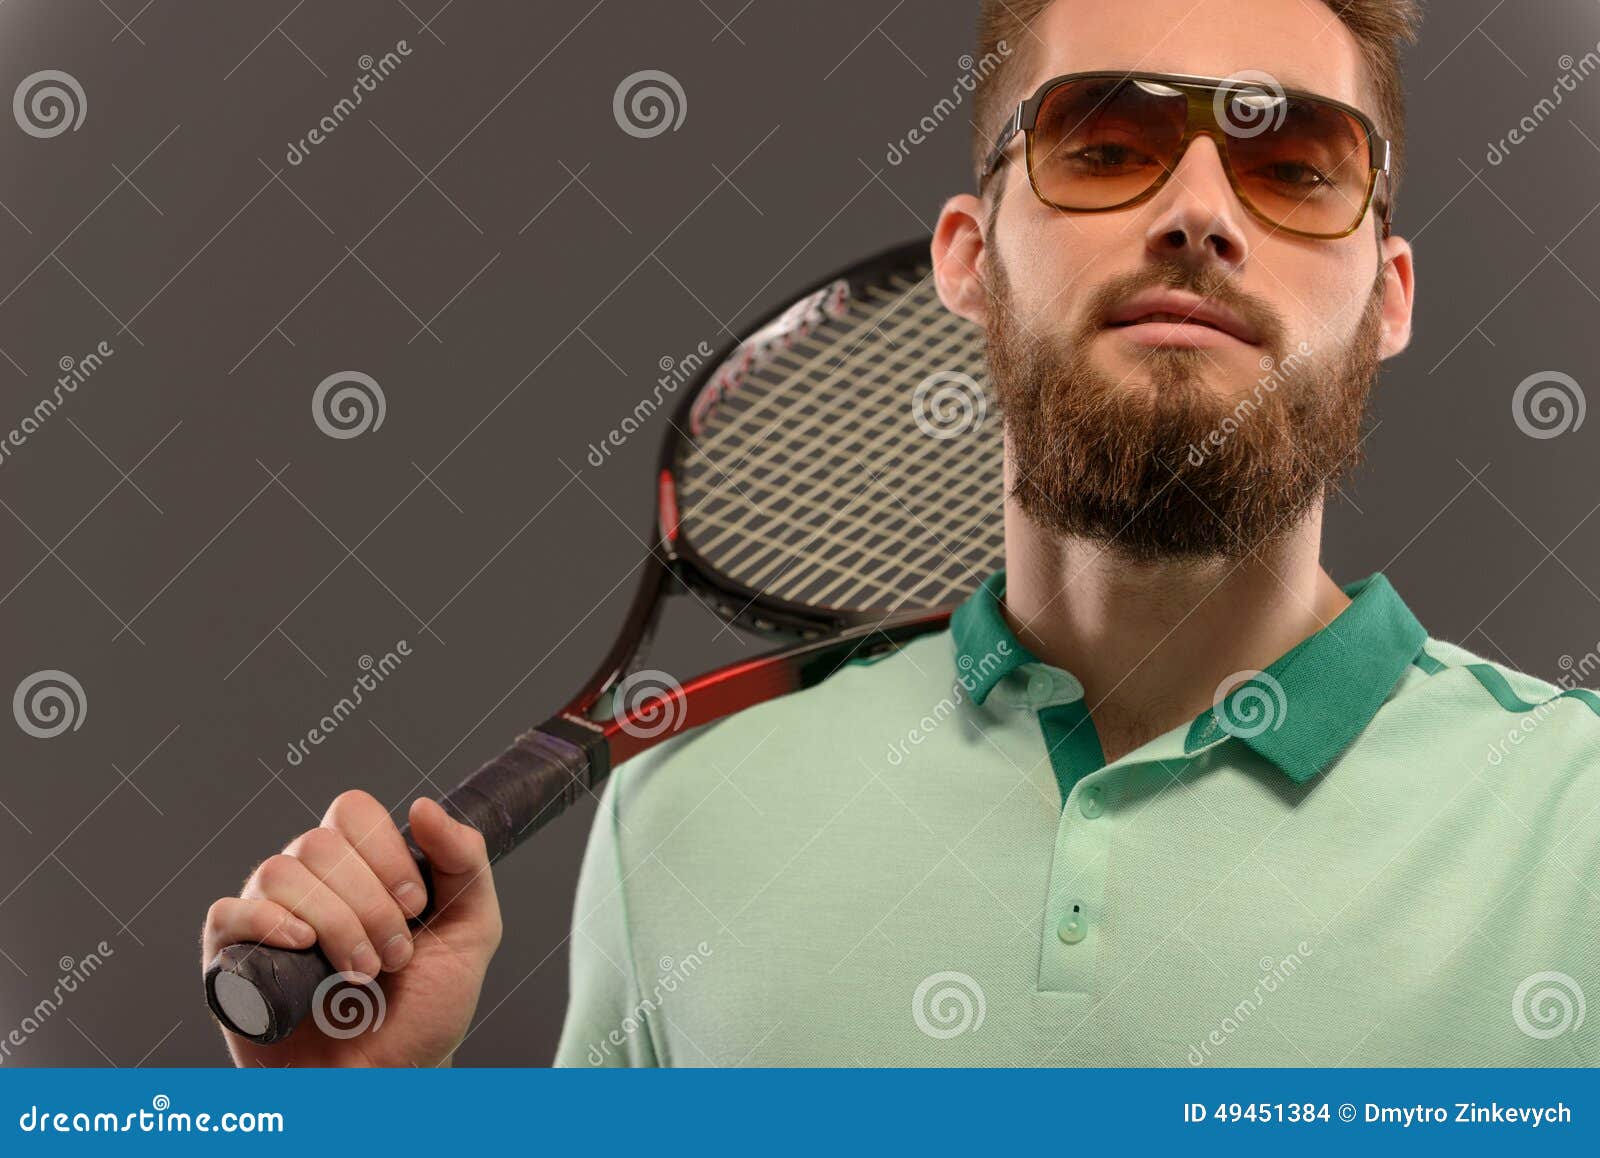 Handsome Young Man in Polo Shirt Holding Tennis Stock Photo - Image of ...